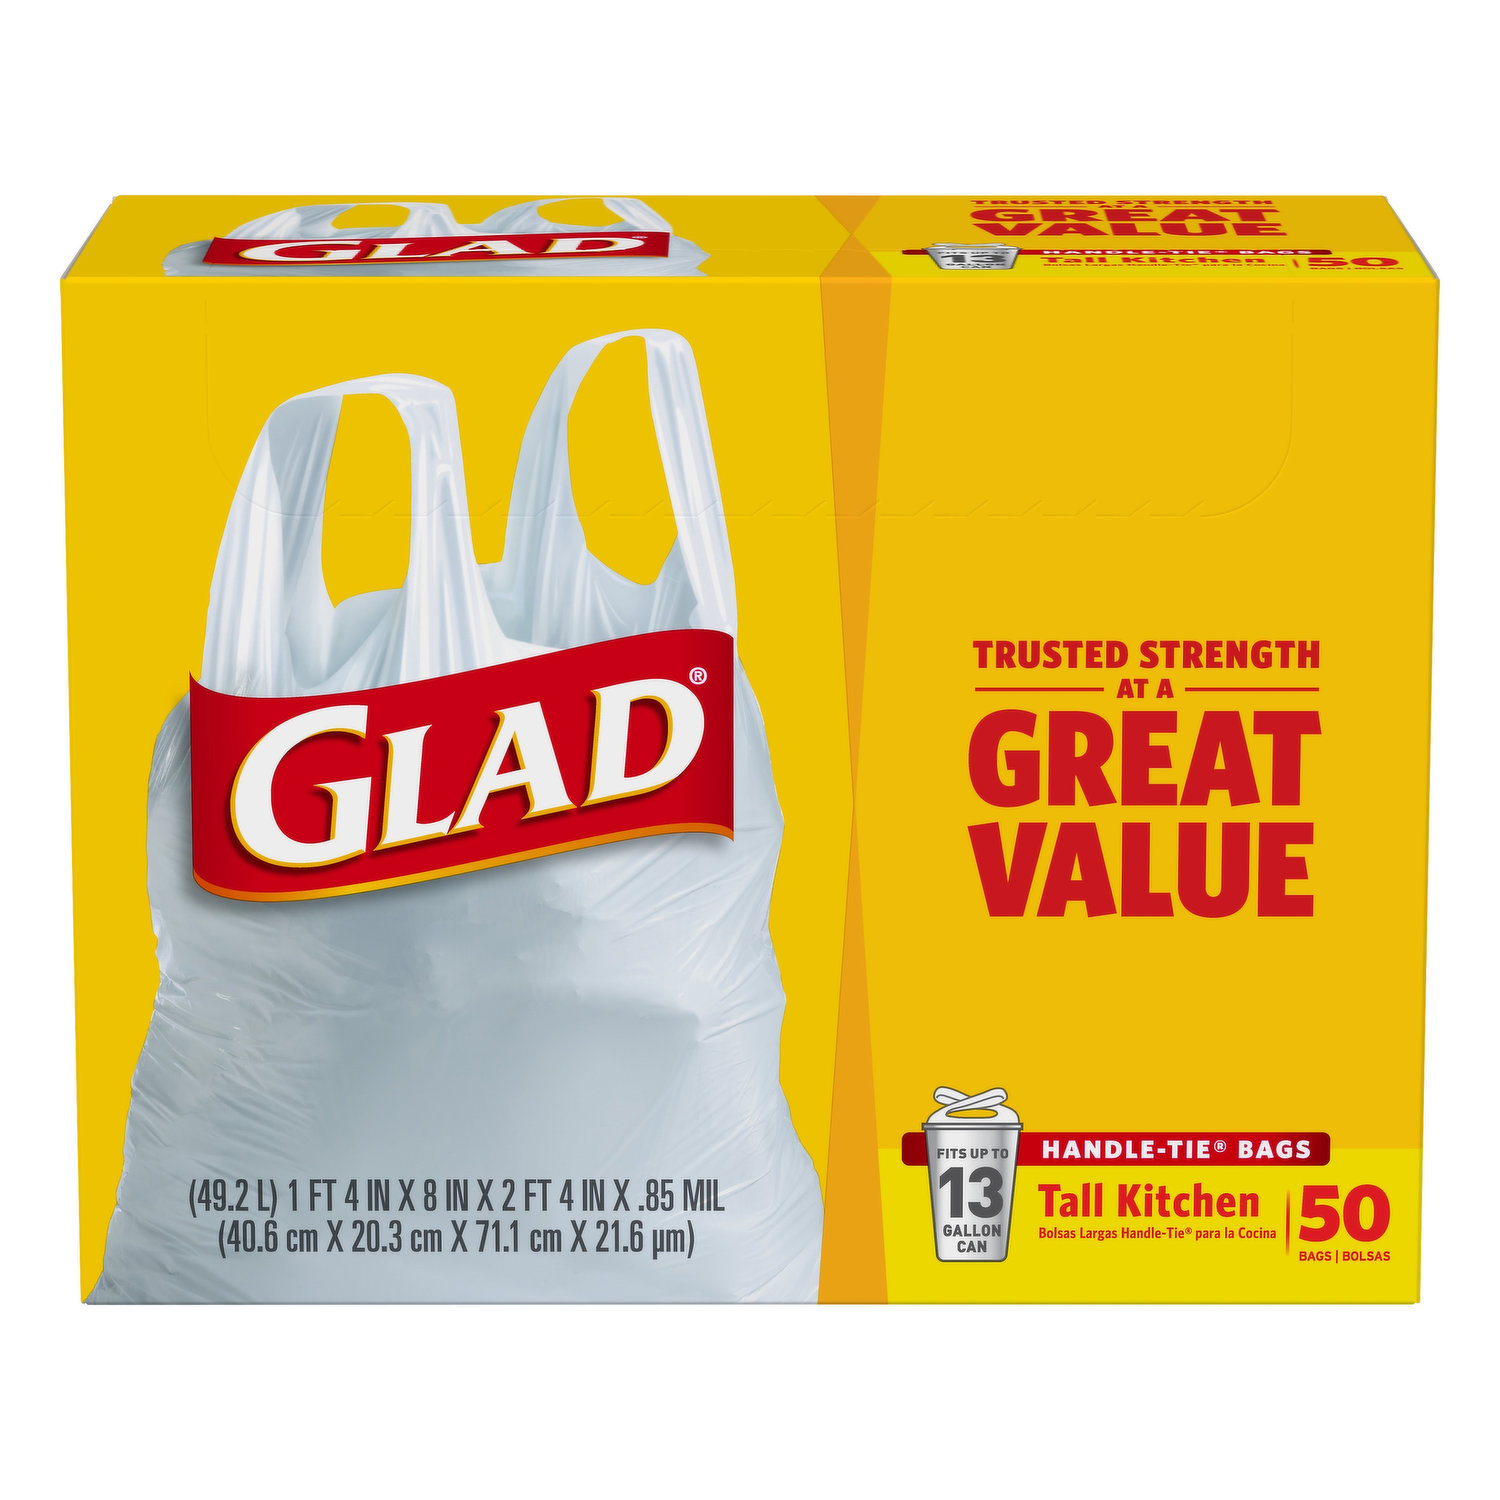 Order Glad Strong Quick-Tie Large Black Trash Bags, 30 Gallon